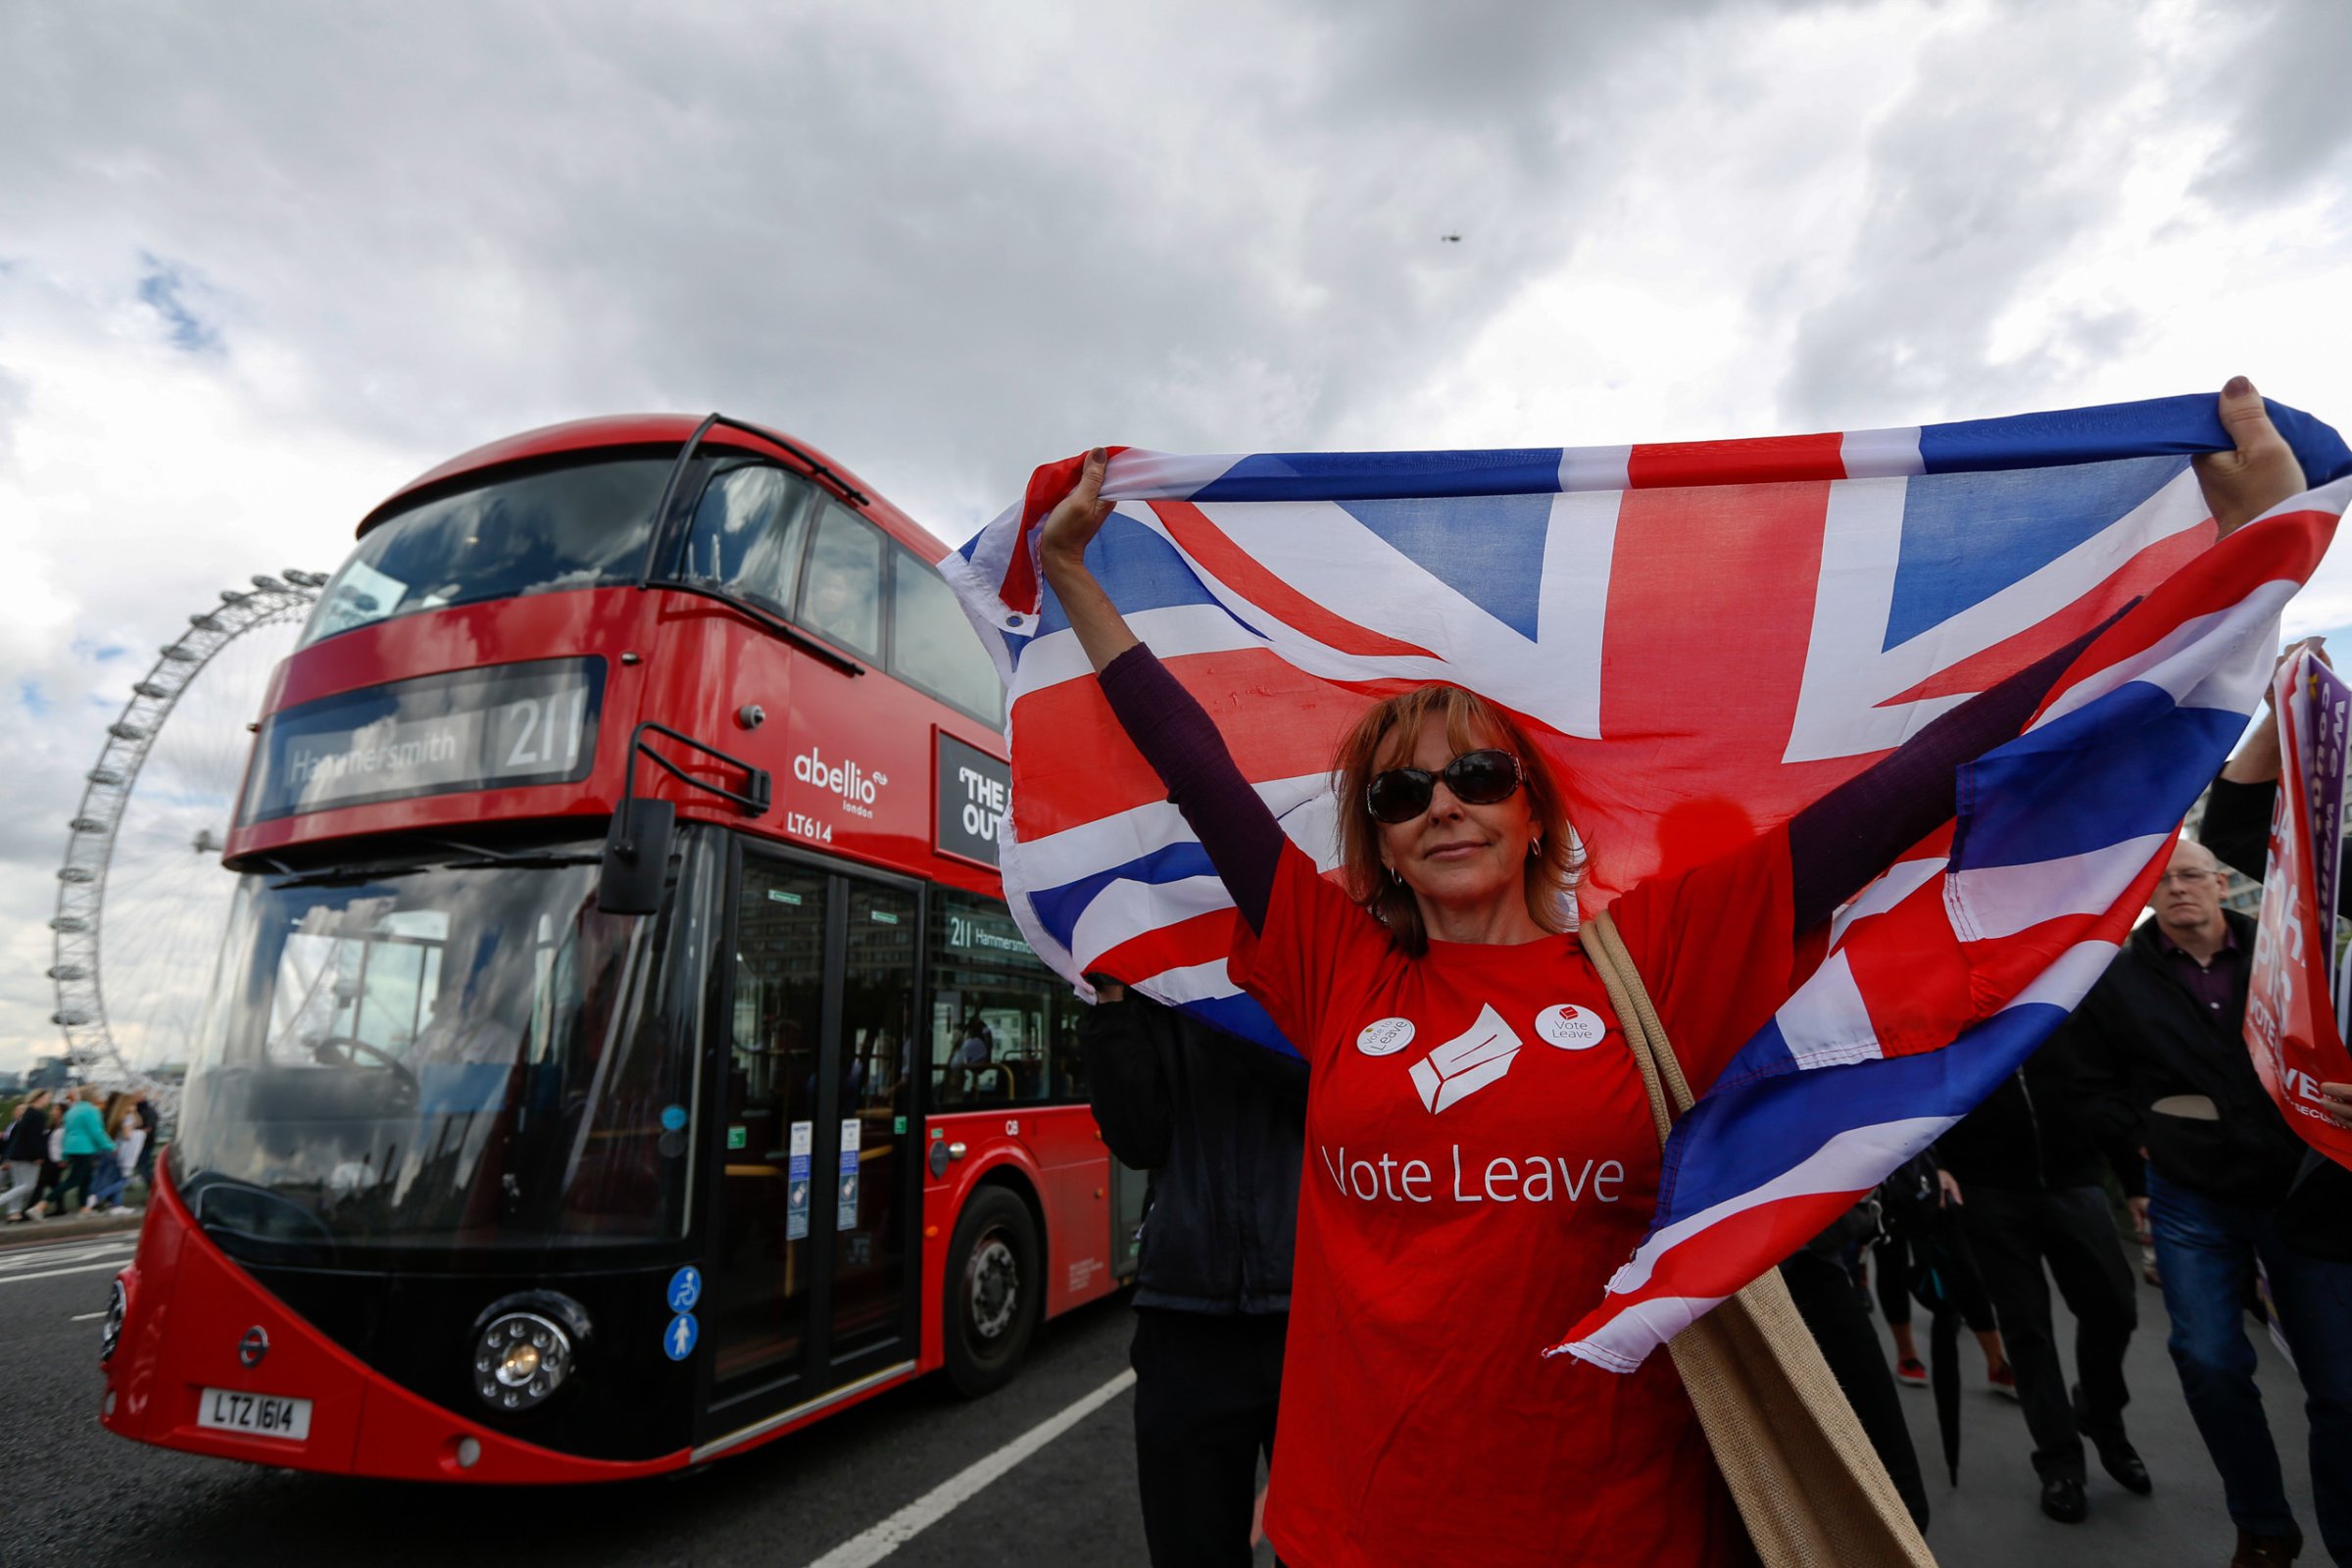 A campaigner wearing a Vote Leave t-shirt and holding a British Union Flag, also known as a Union Jack, stands on a Westminster Bridge near the Houses of Parliament in London on June 15, 2016.